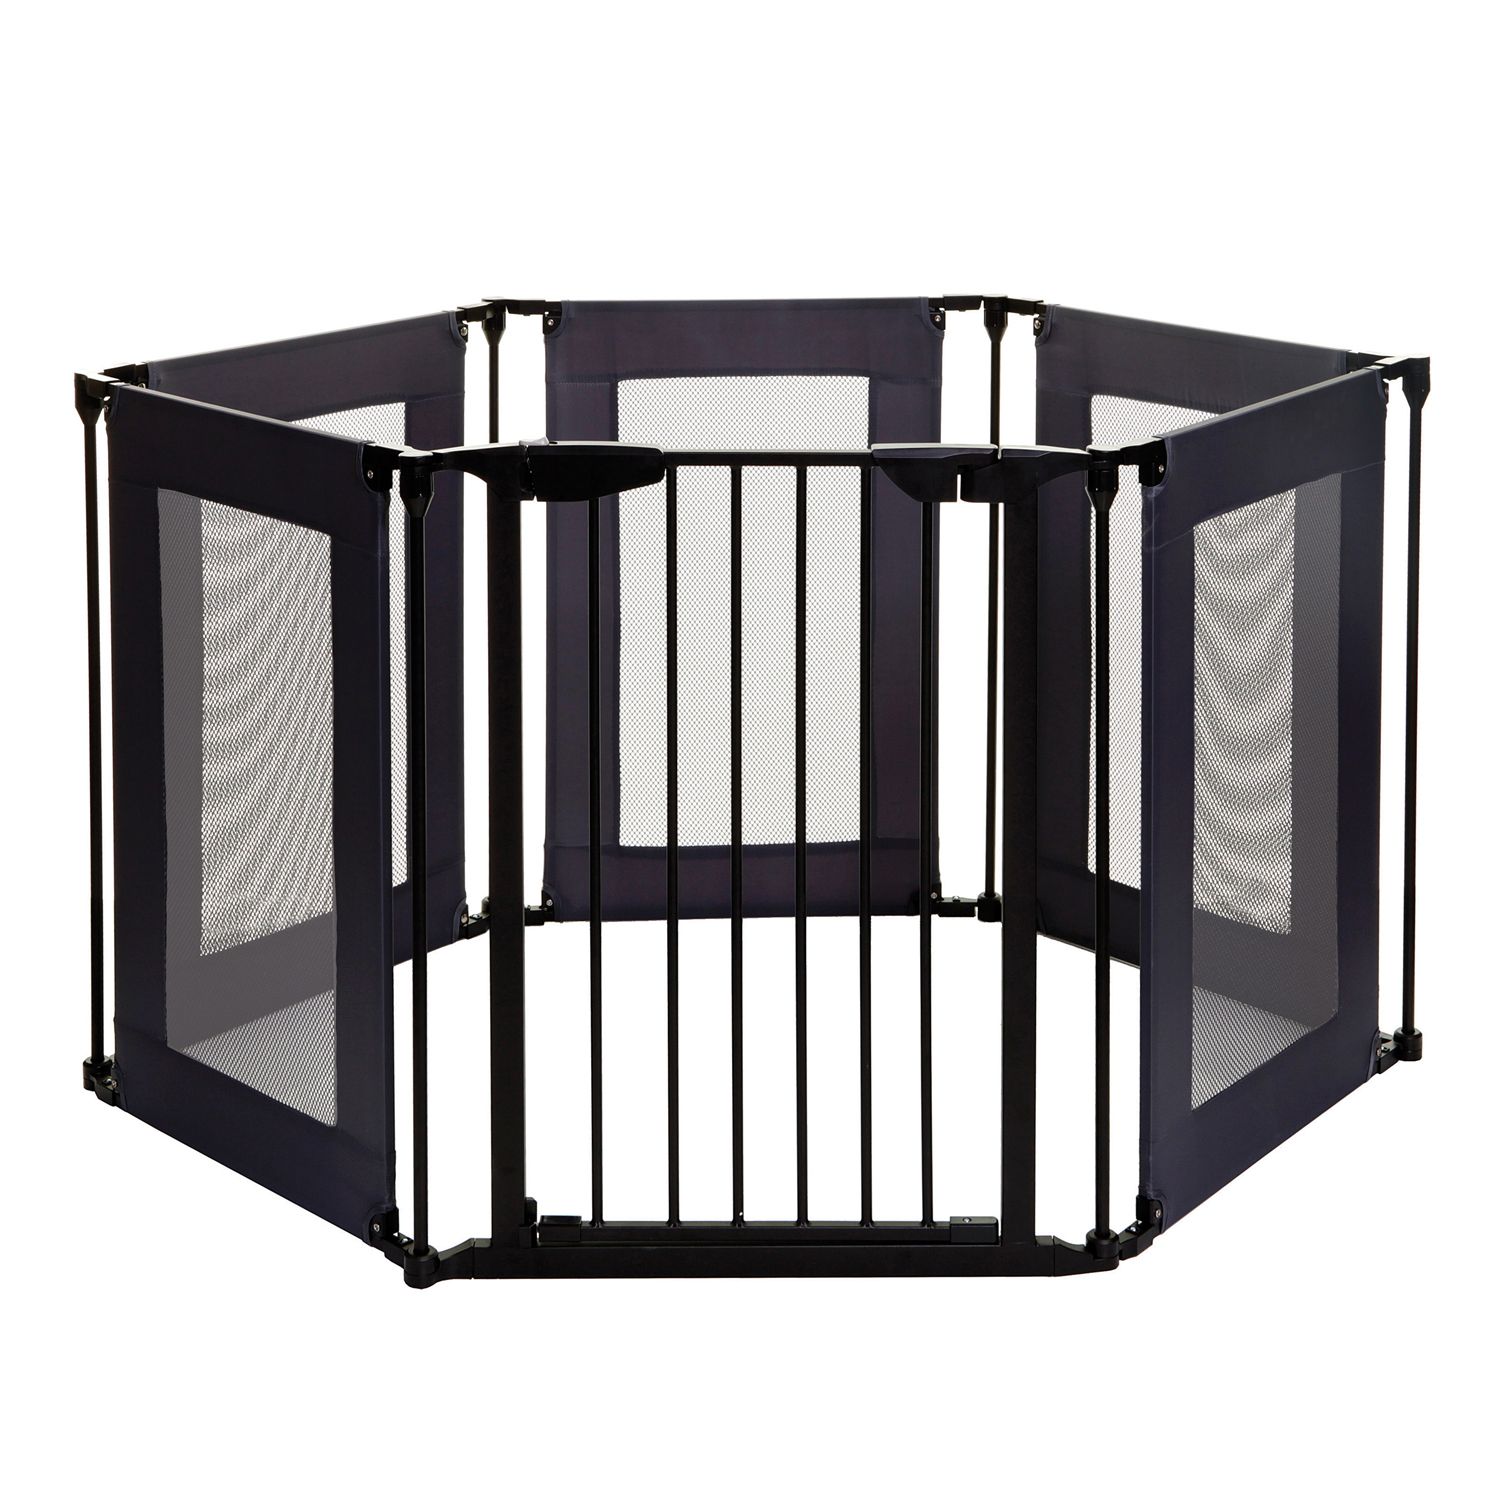 Image for Dreambaby Brooklyn Converta 6-Panel Play Pen & Gate at Kohl's.